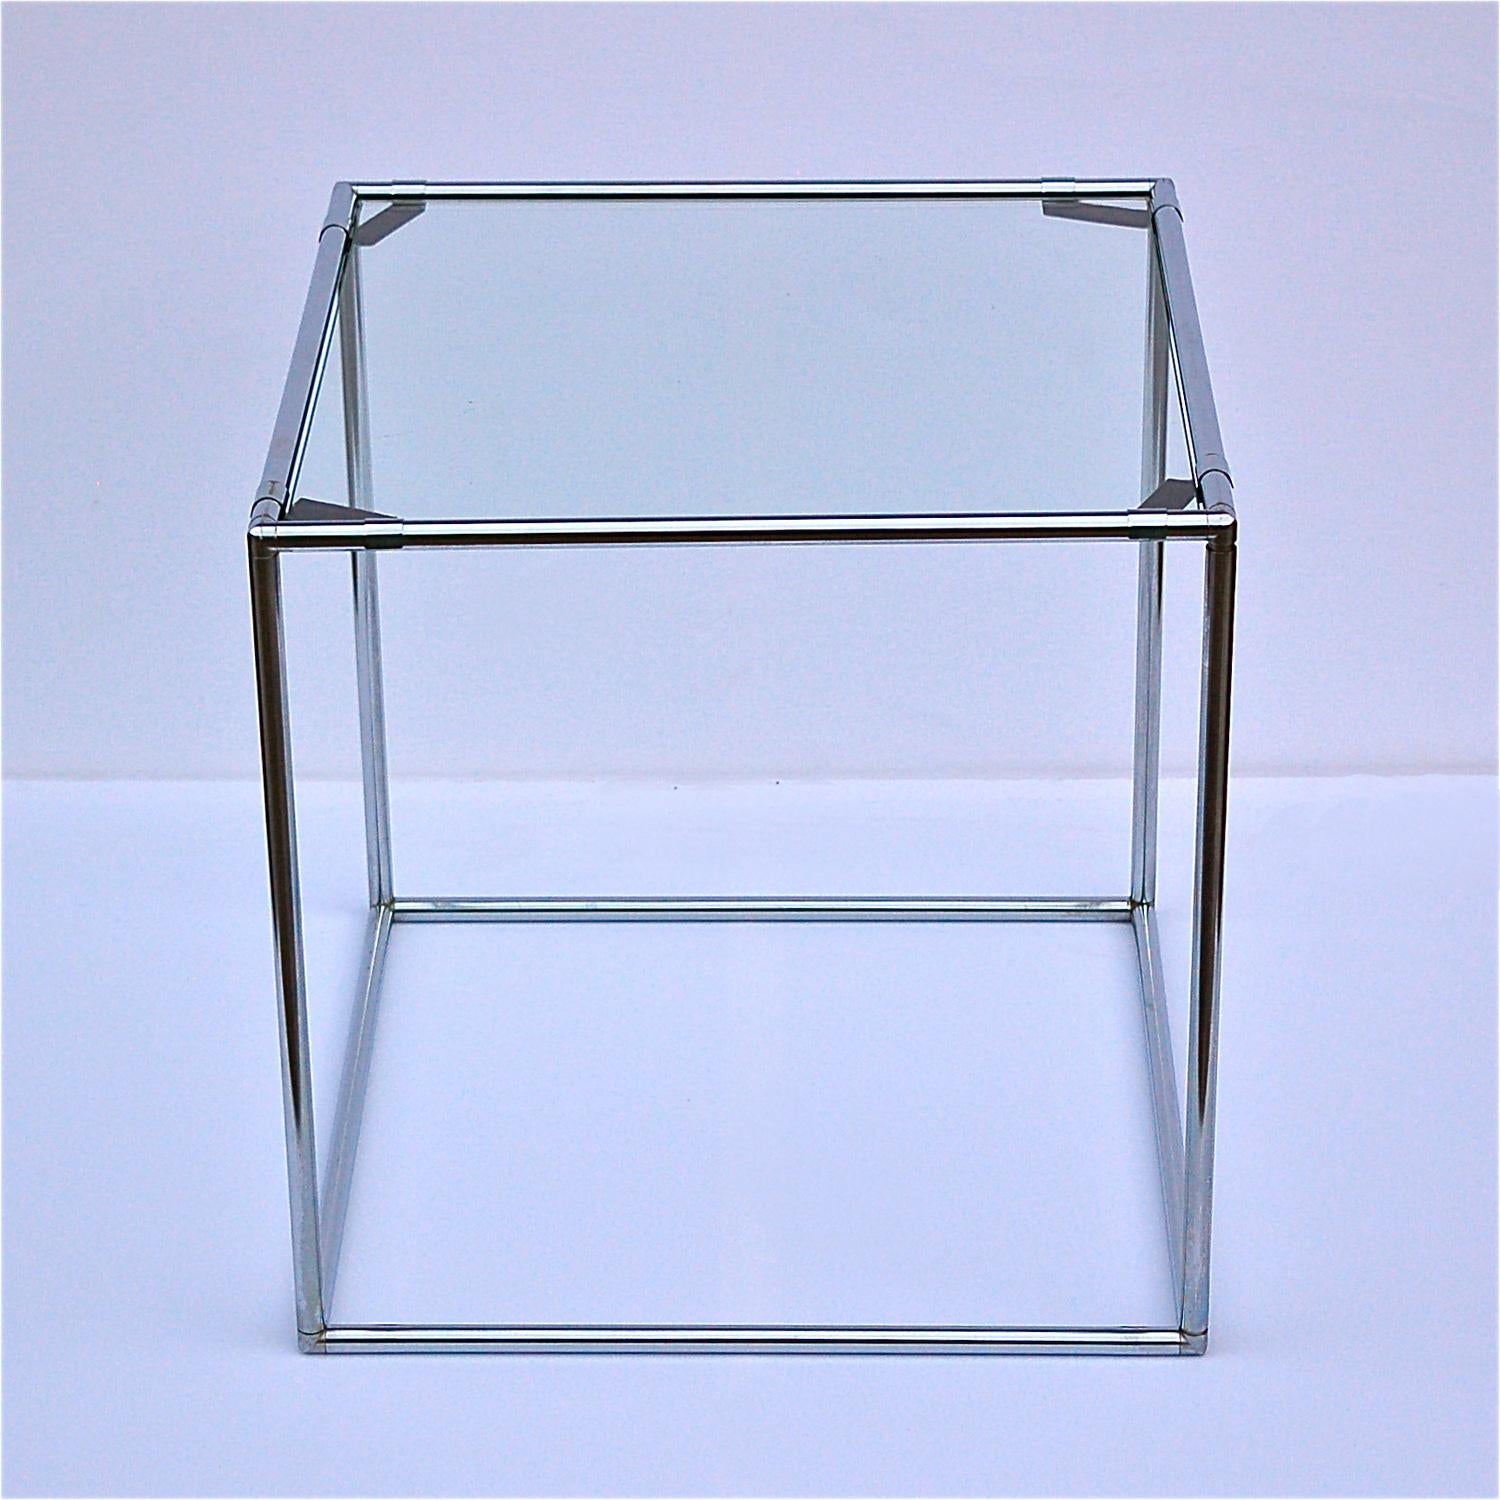 Vintage, 1960s side table, designed by Poul Cadovius for Abstracta System. Square, chromed tubular metal structure with glass plate, glass top. The minimalistic design of this table creates a perfect harmony between form and function. Although